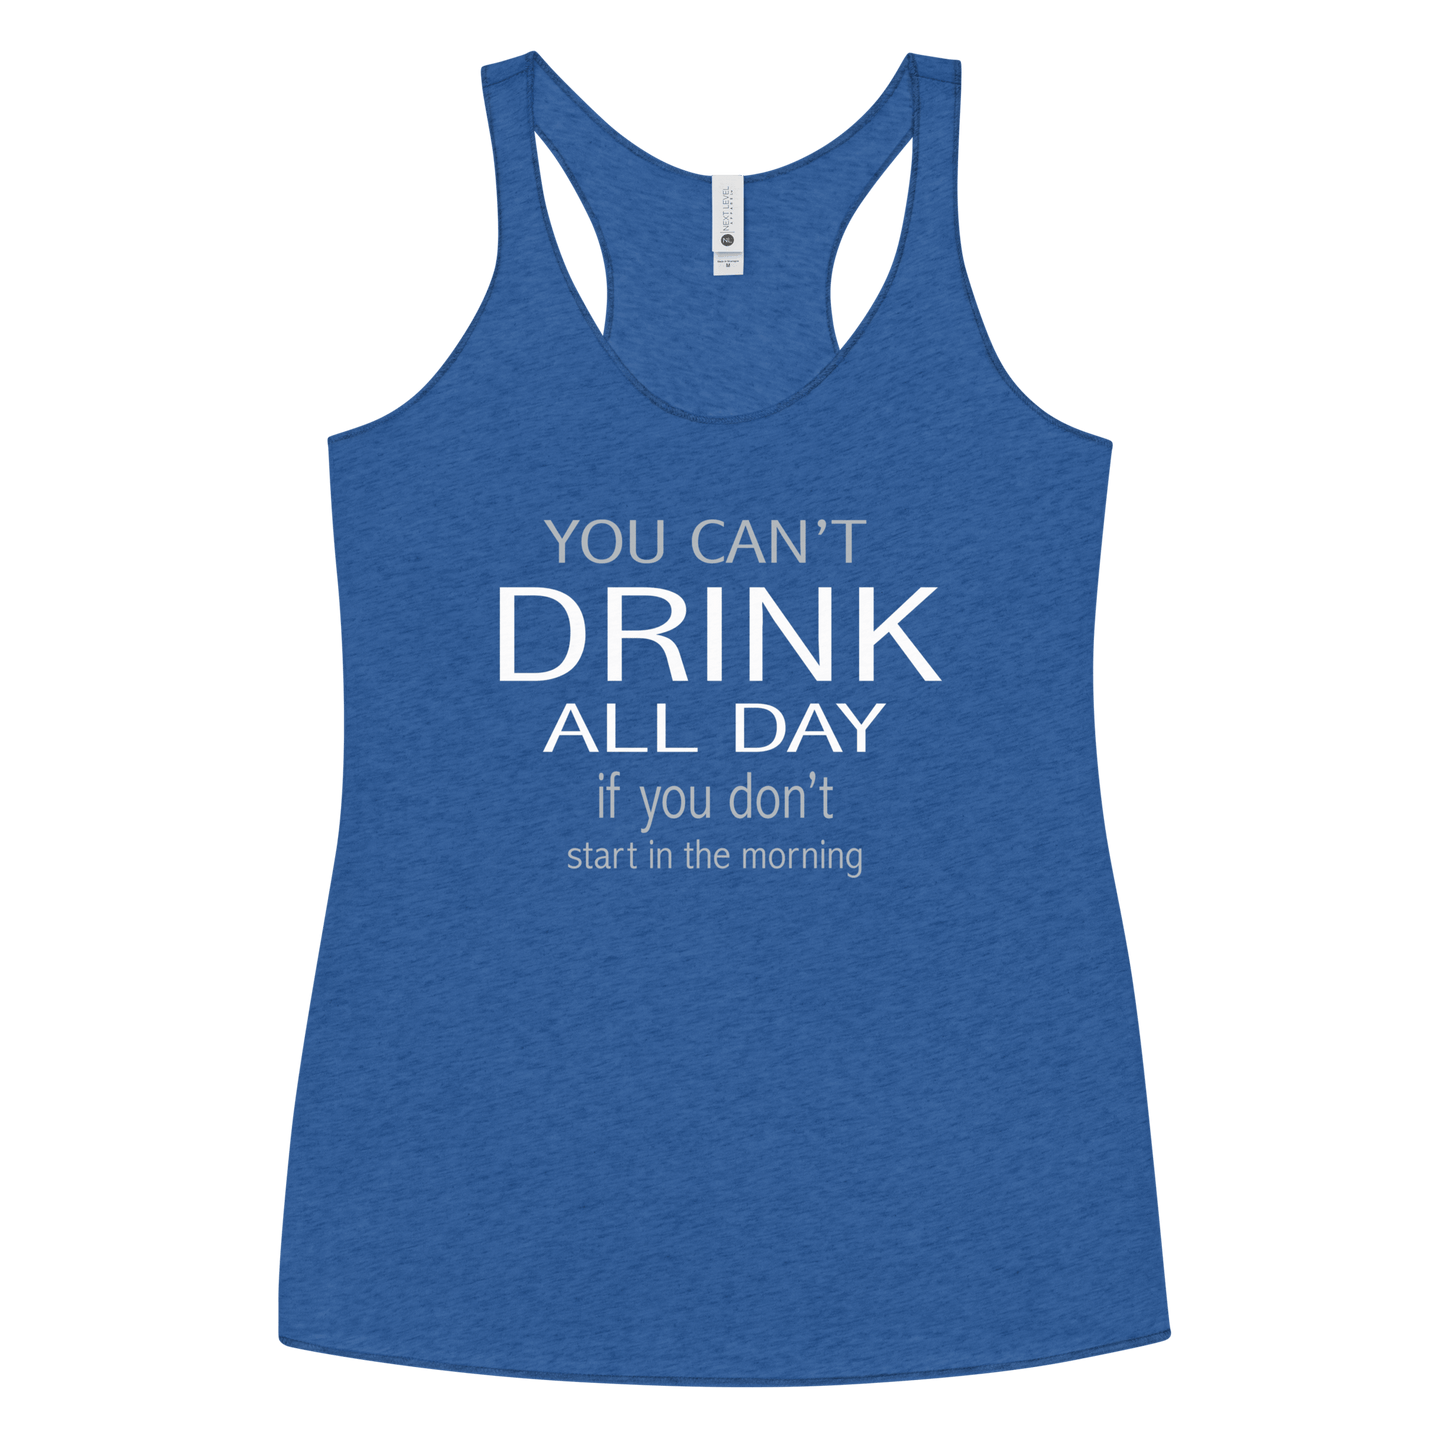 You Can't Drink All Day if you Don't Start in the Morning Women's Racerback Tank